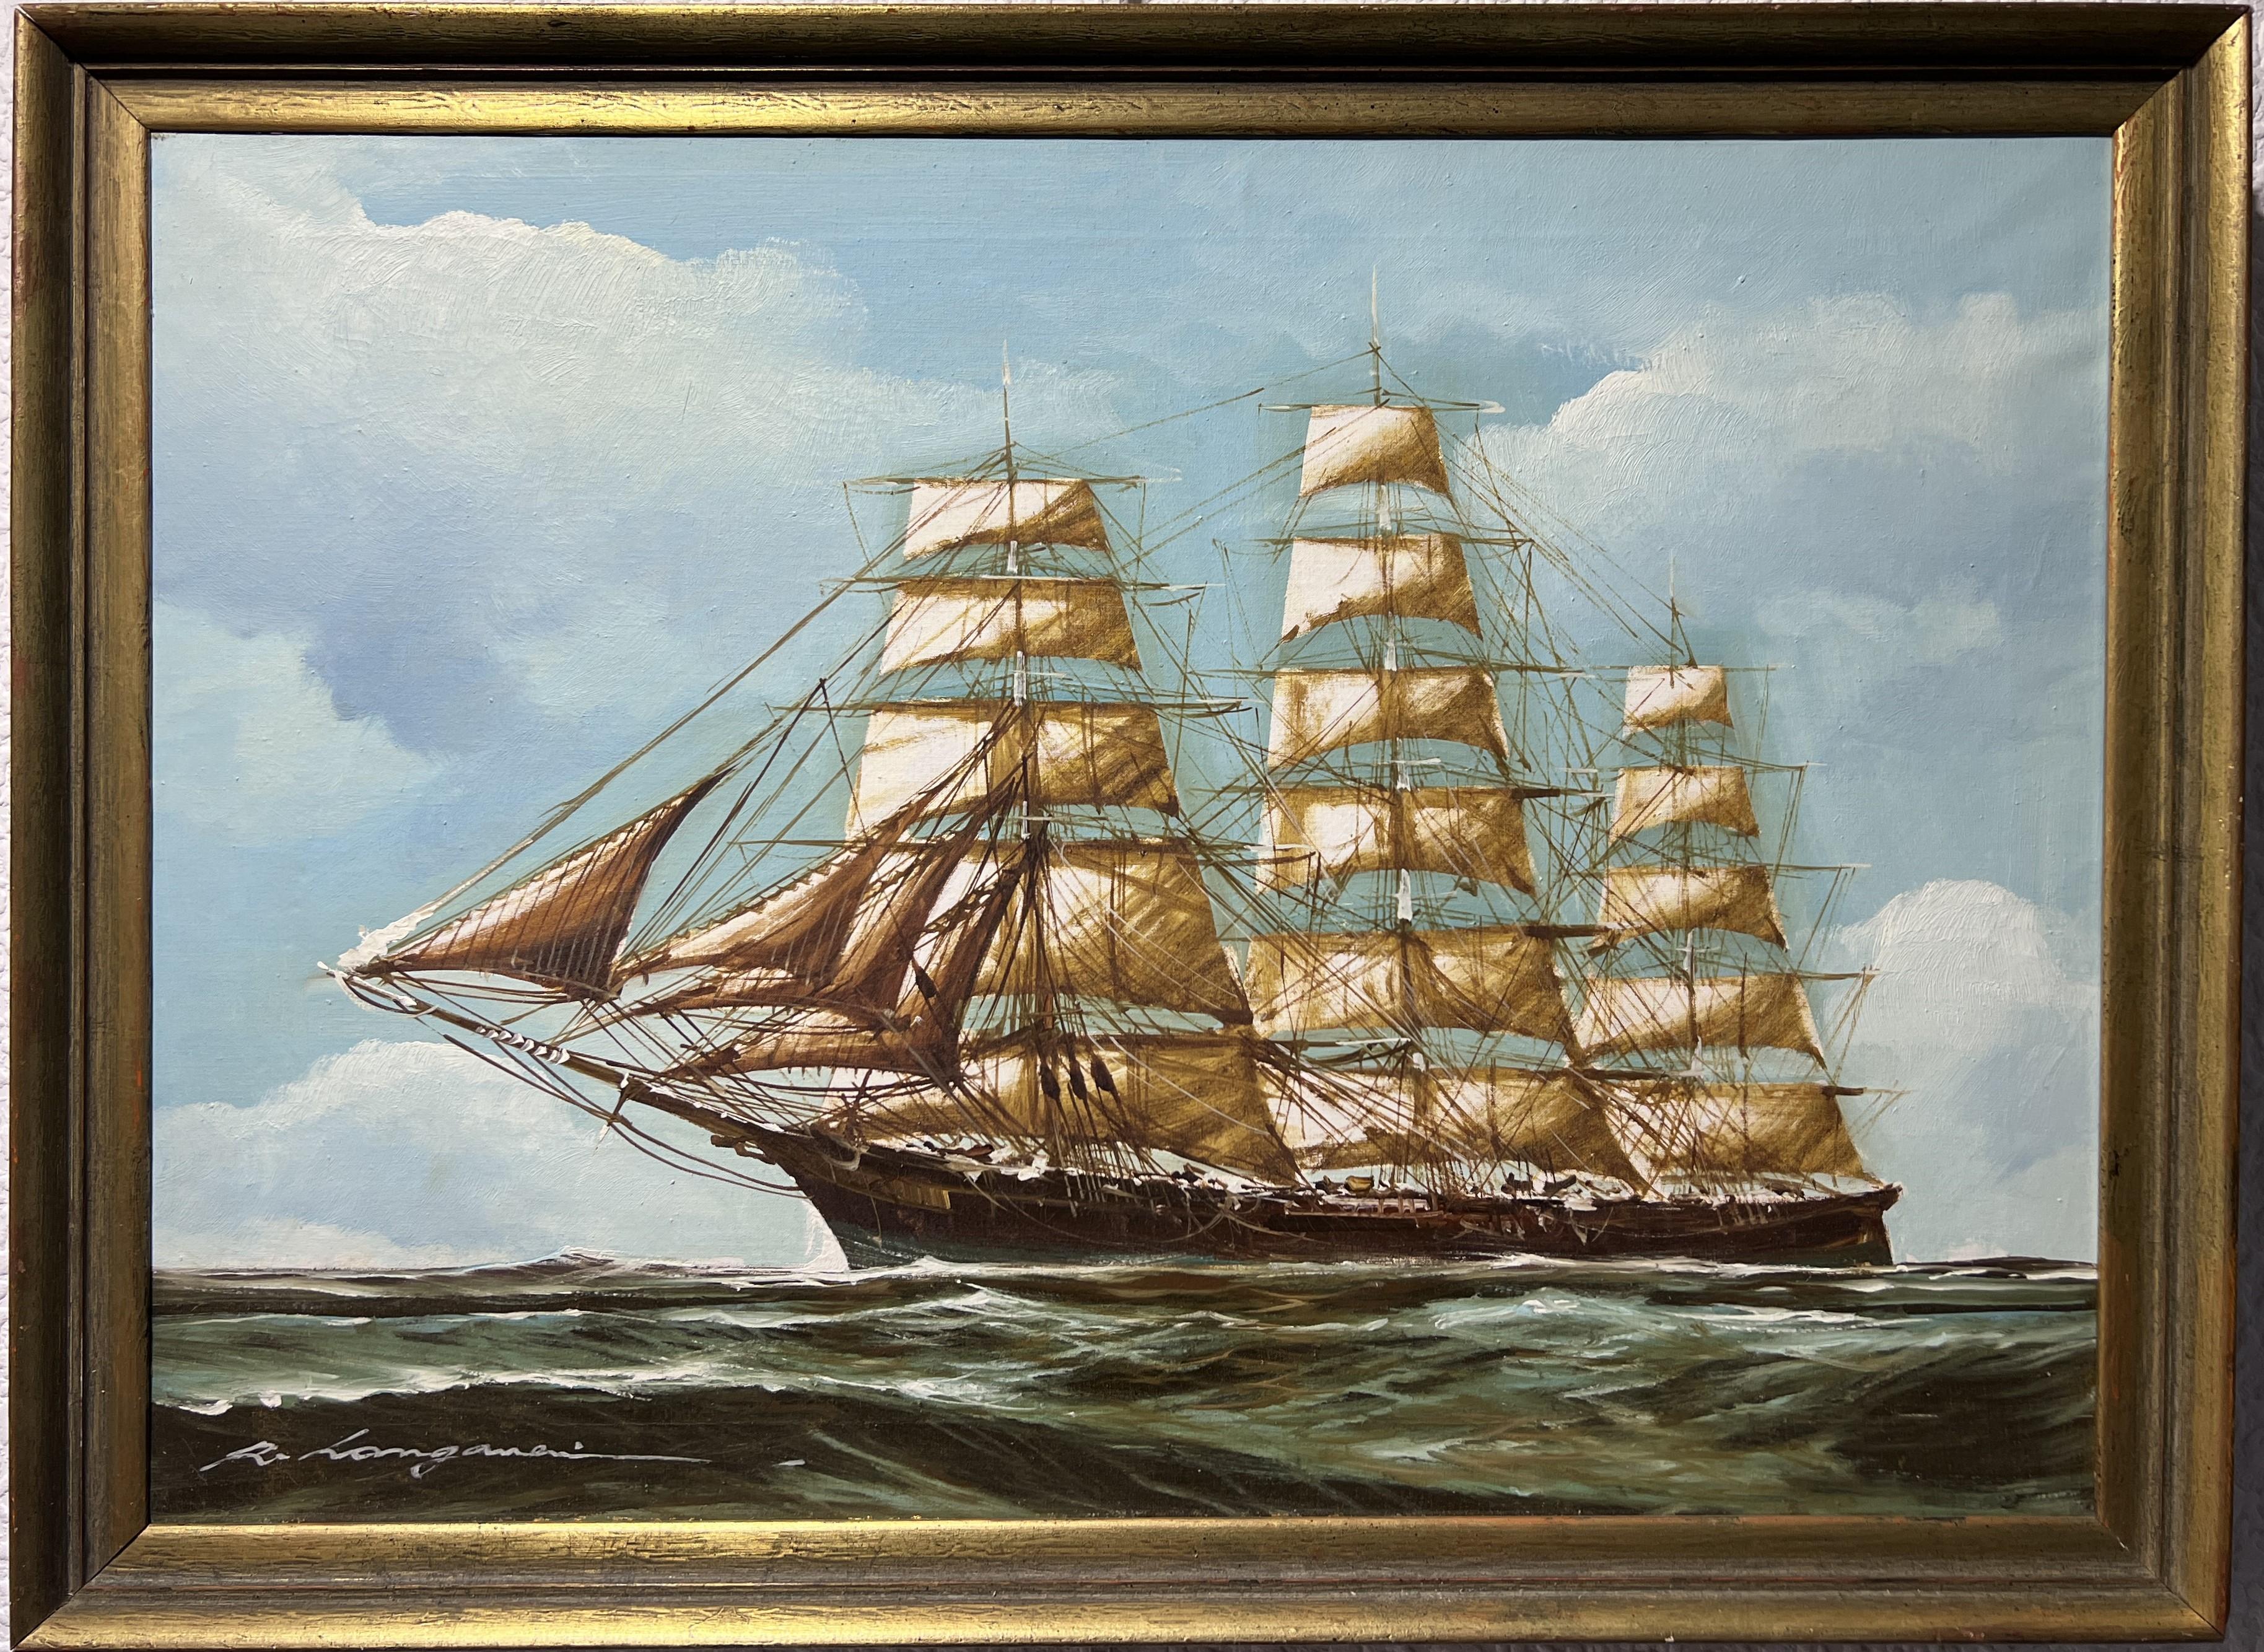 This is an amazing vintage original oil painting on canvas depicting Clipper ships in the stormy ocean by Listed Italian Artist Renato Longanesi (b.1931).

This is a classic maritime style, one that is so rarely seen nowadays. A wide array of blue